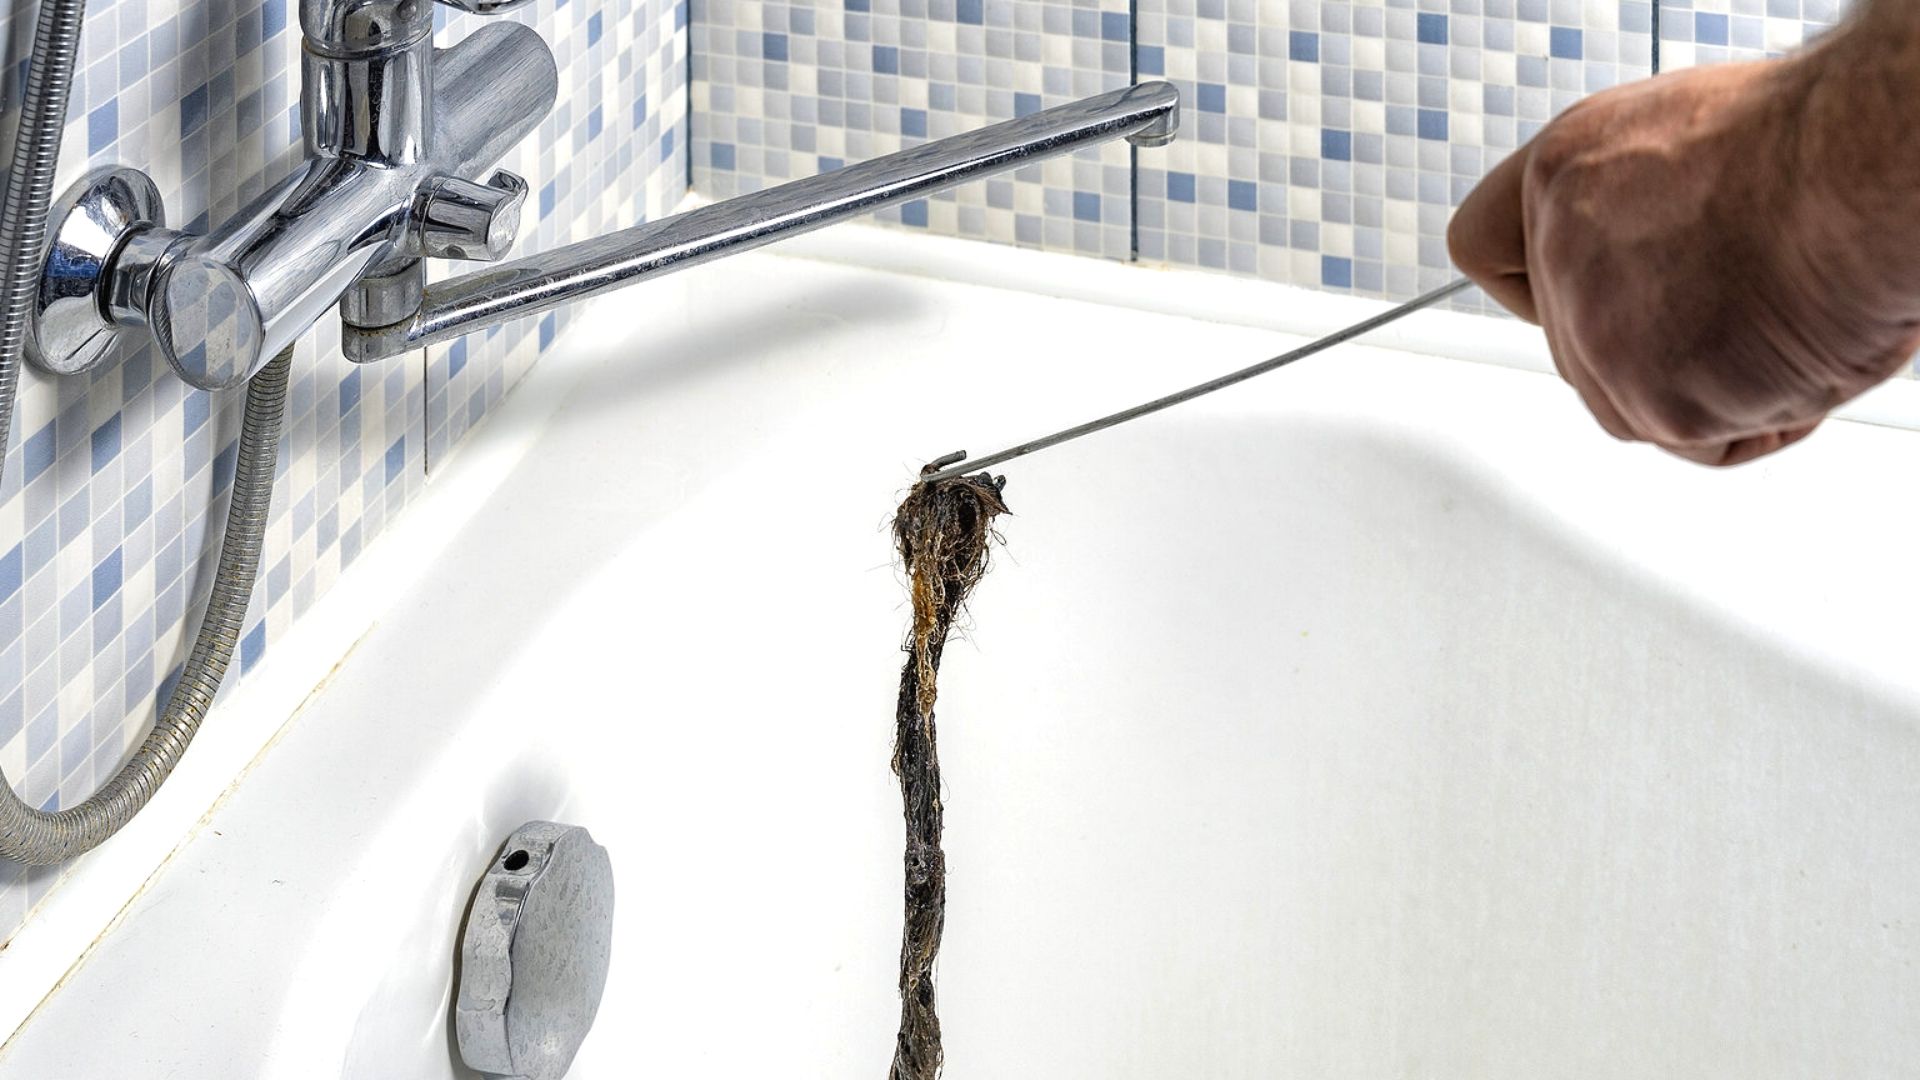 https://zeve.au/wp/uploads/2022/04/removing-hair-from-bathtub-with-drain-auger.jpg